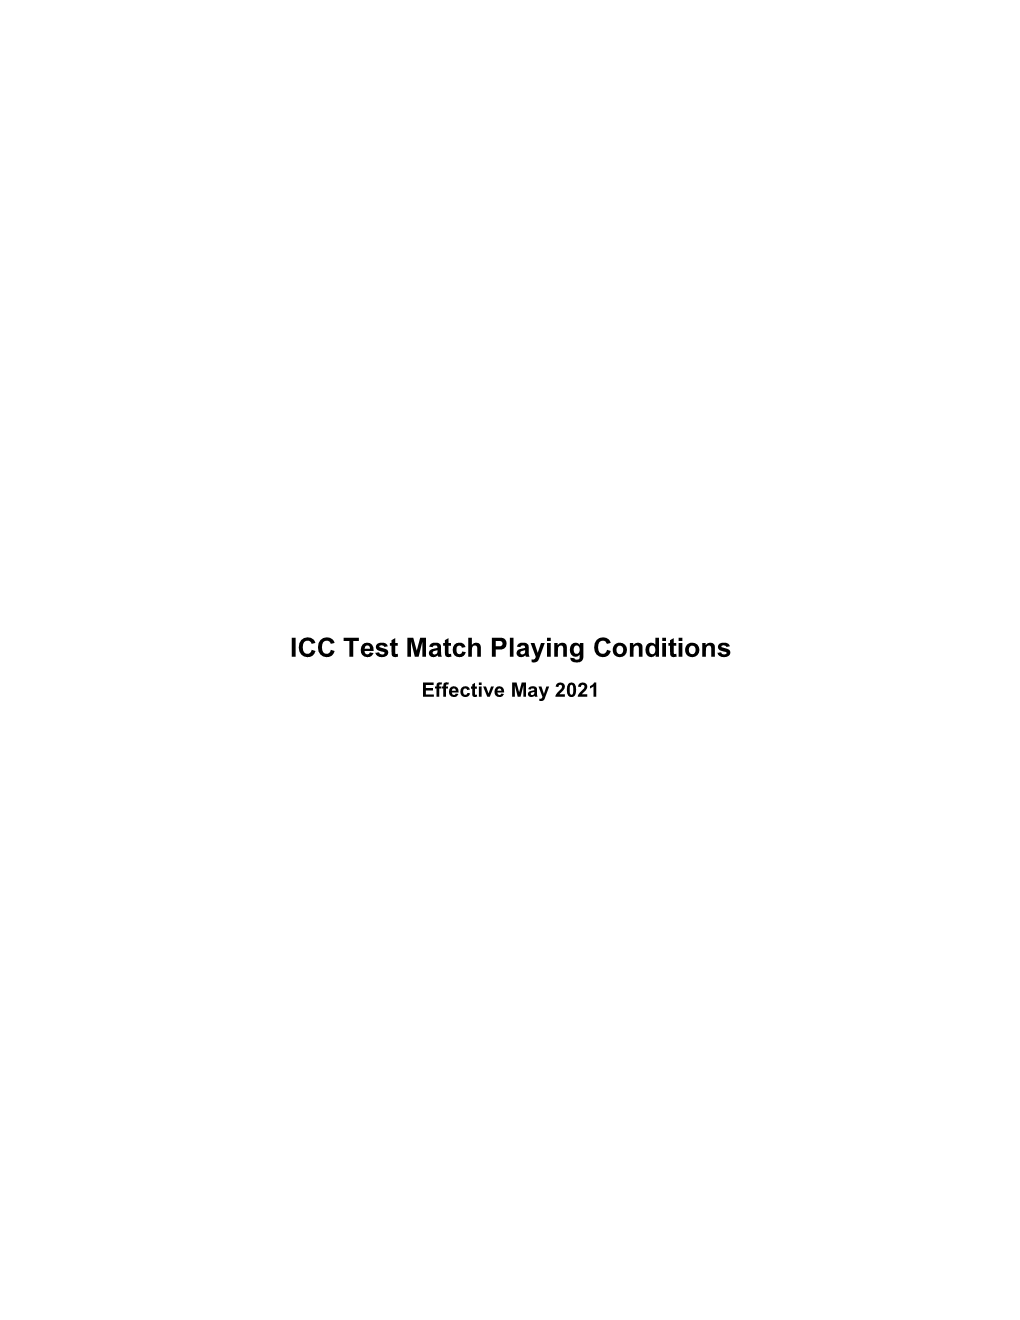 WTC Playing Conditions